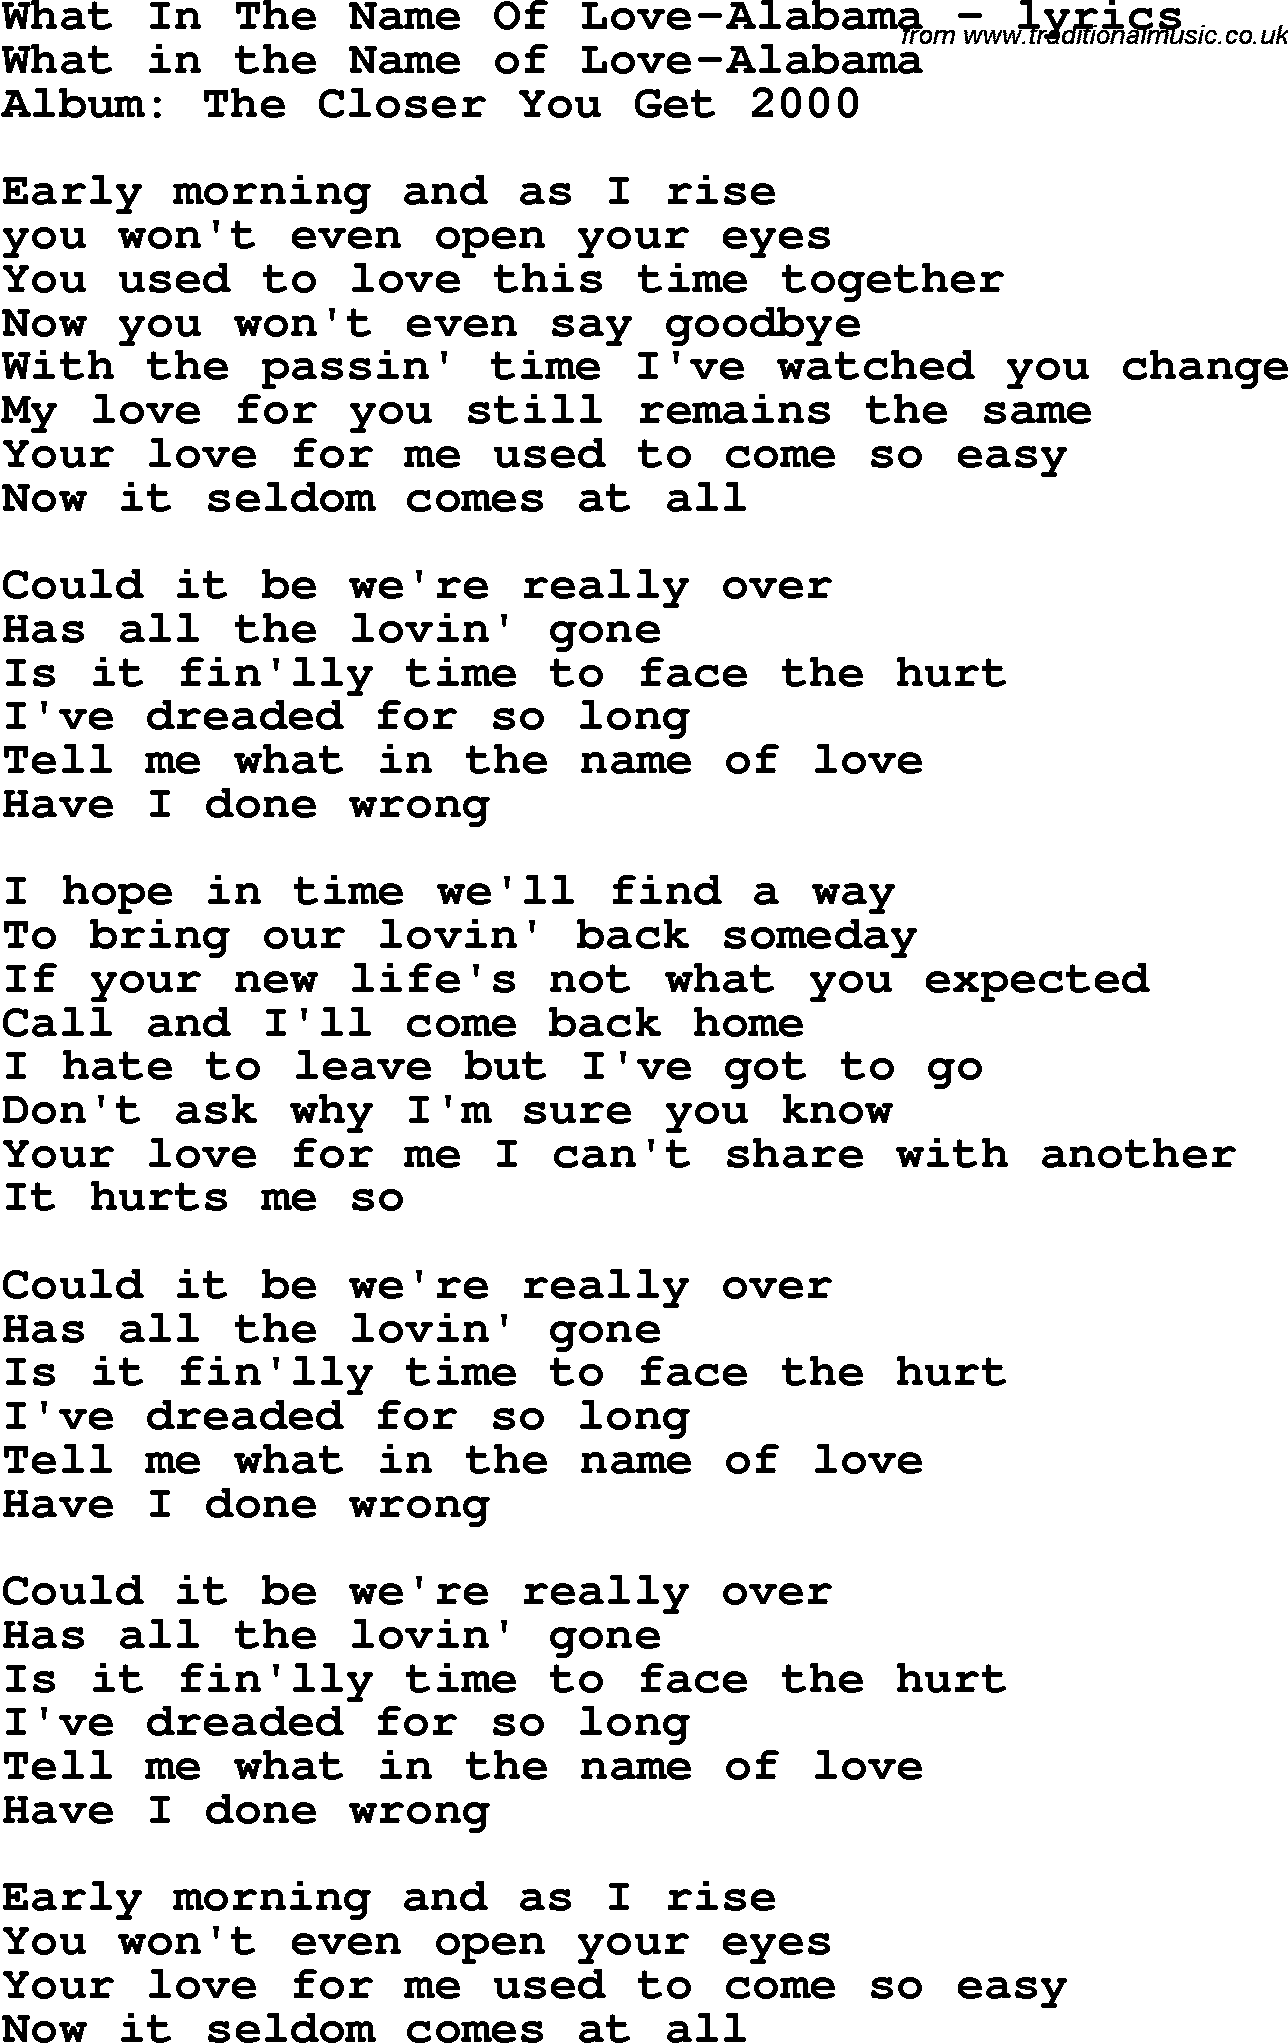 Love Song Lyrics for: What In The Name Of Love-Alabama